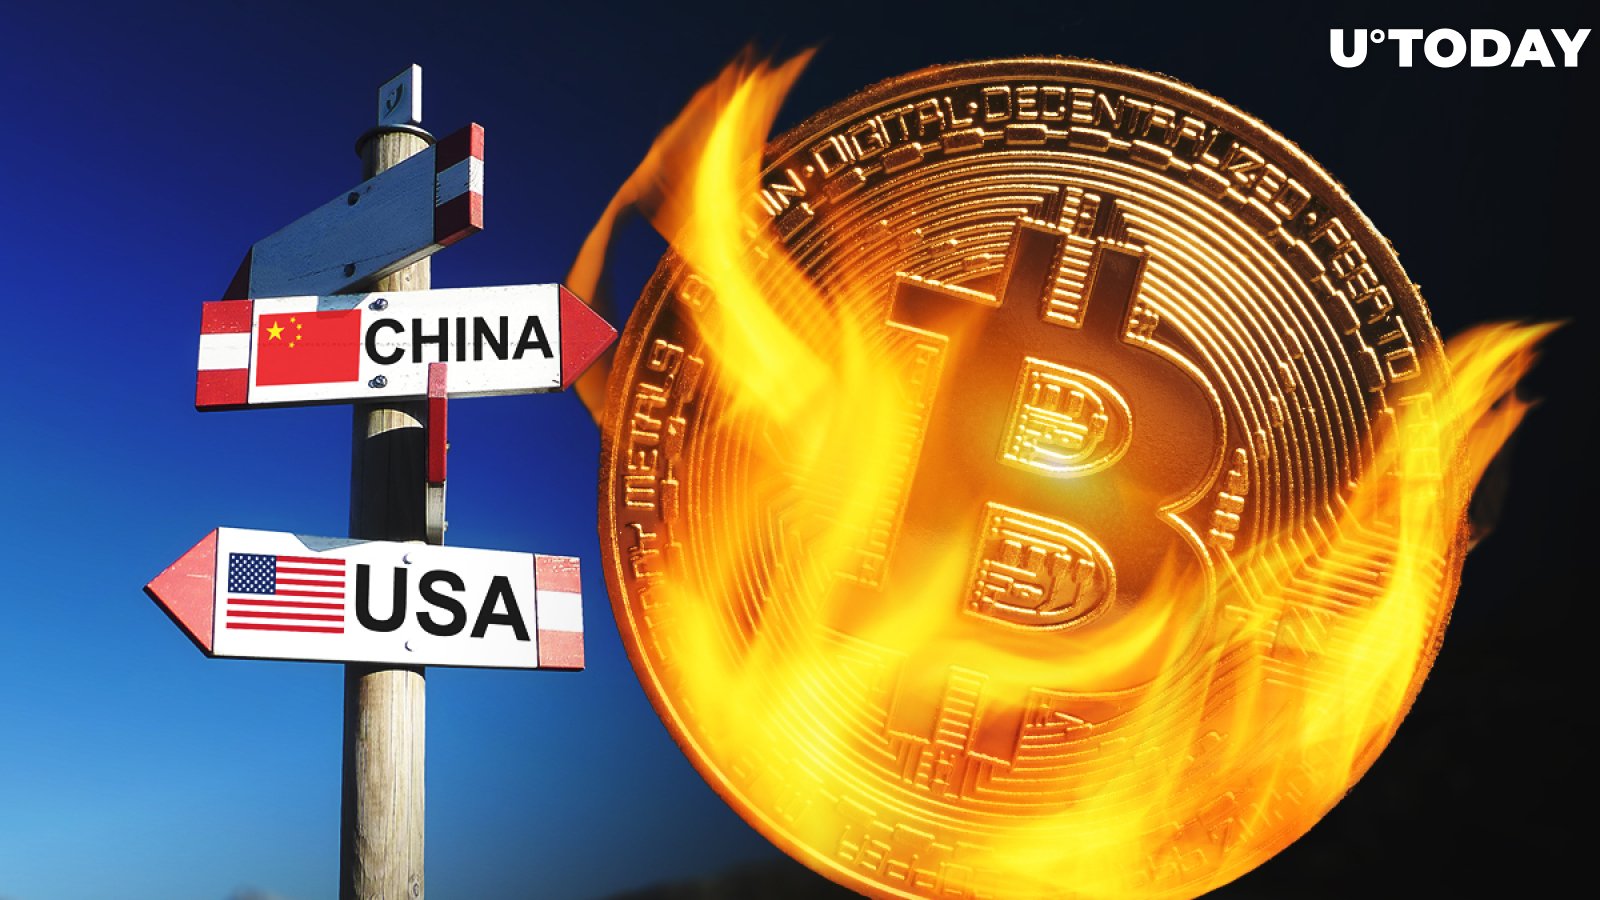 Bitcoin Dropped After China FUD—Analyst Explains Why It's a Nonissue